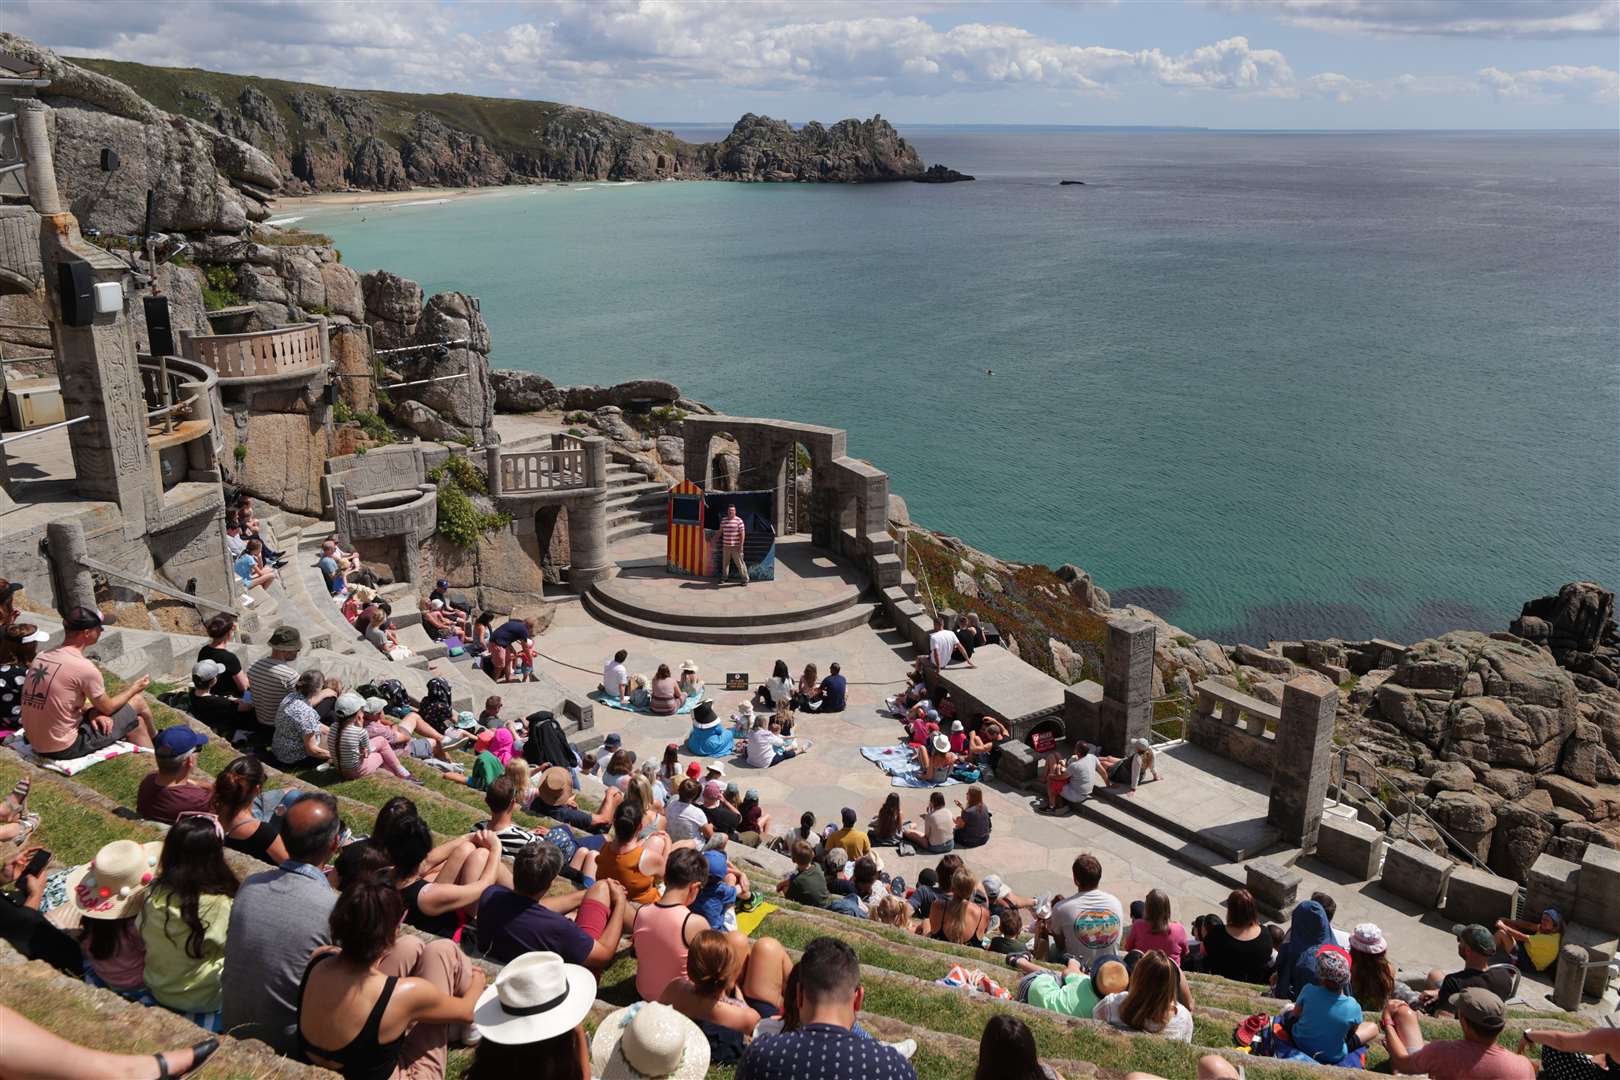 An audience enjoys the Sea Show performance at the Minack Theatre in Porthcurno near Lands End, on August 3 (David Davies/PA)